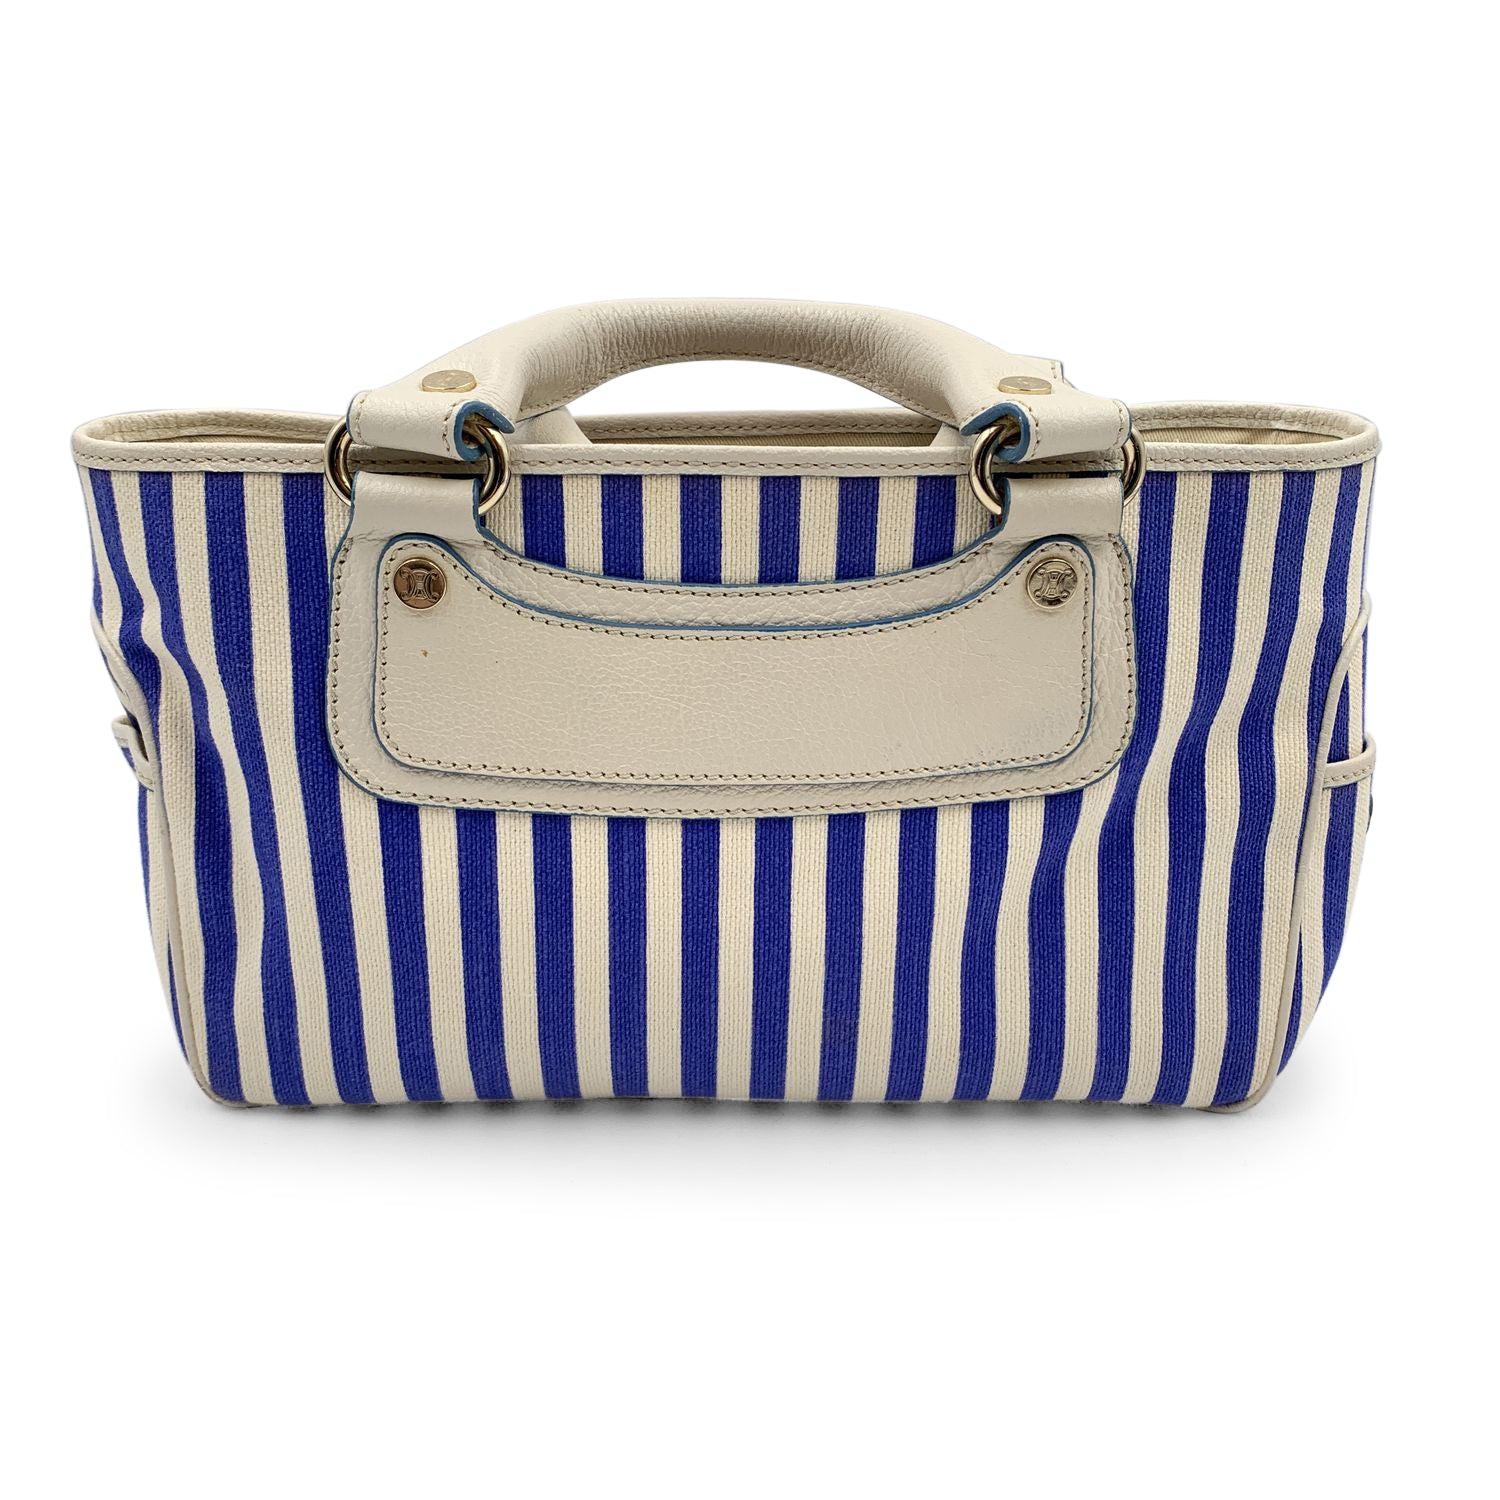 Celine Blue White Striped Canvas Boogie Bag Satchel Tote Handbag In Excellent Condition In Rome, Rome